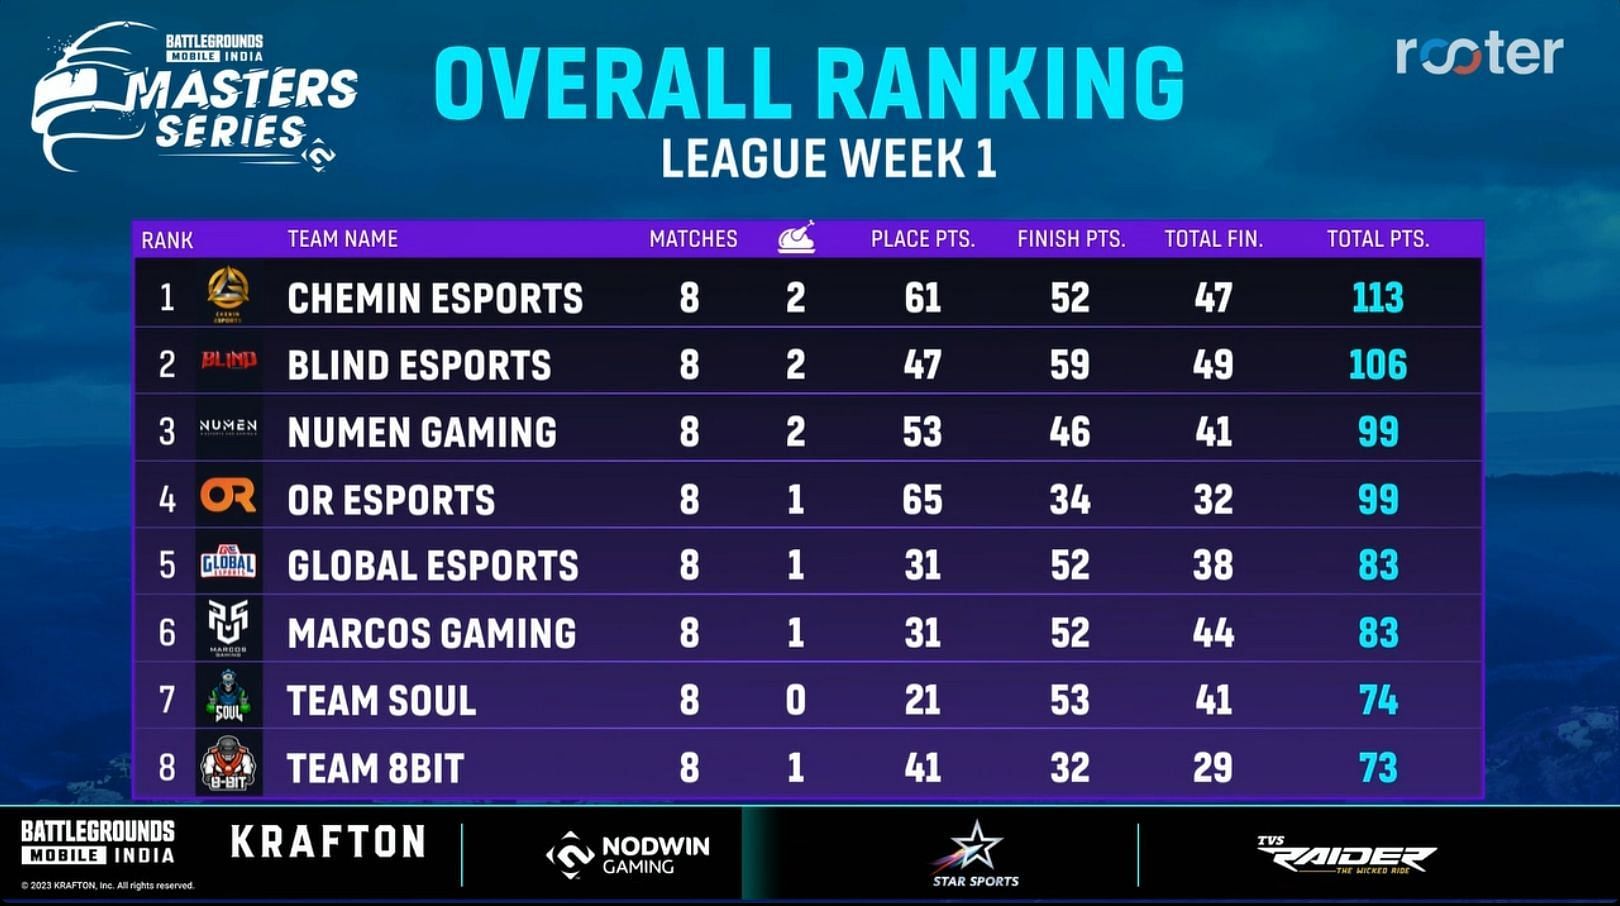 Chemin Esports earned 113 points in League Week 1 (Image via Rooter)